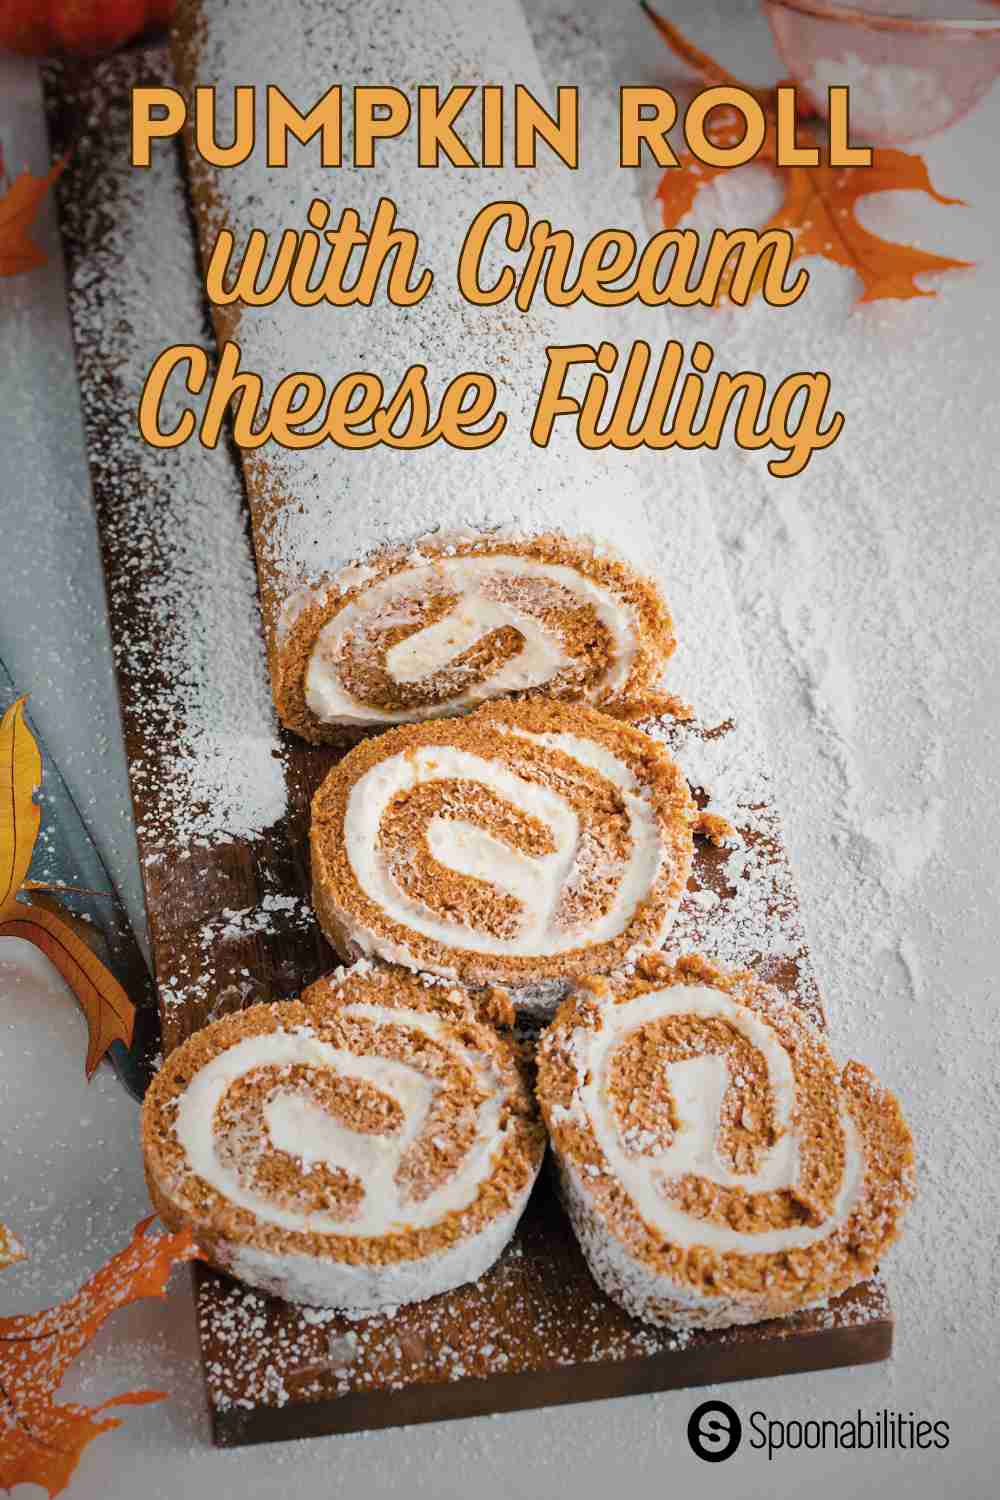 Three slices of cake from a Pumpkin Roll with cream cheese filling on a wooden chopping board